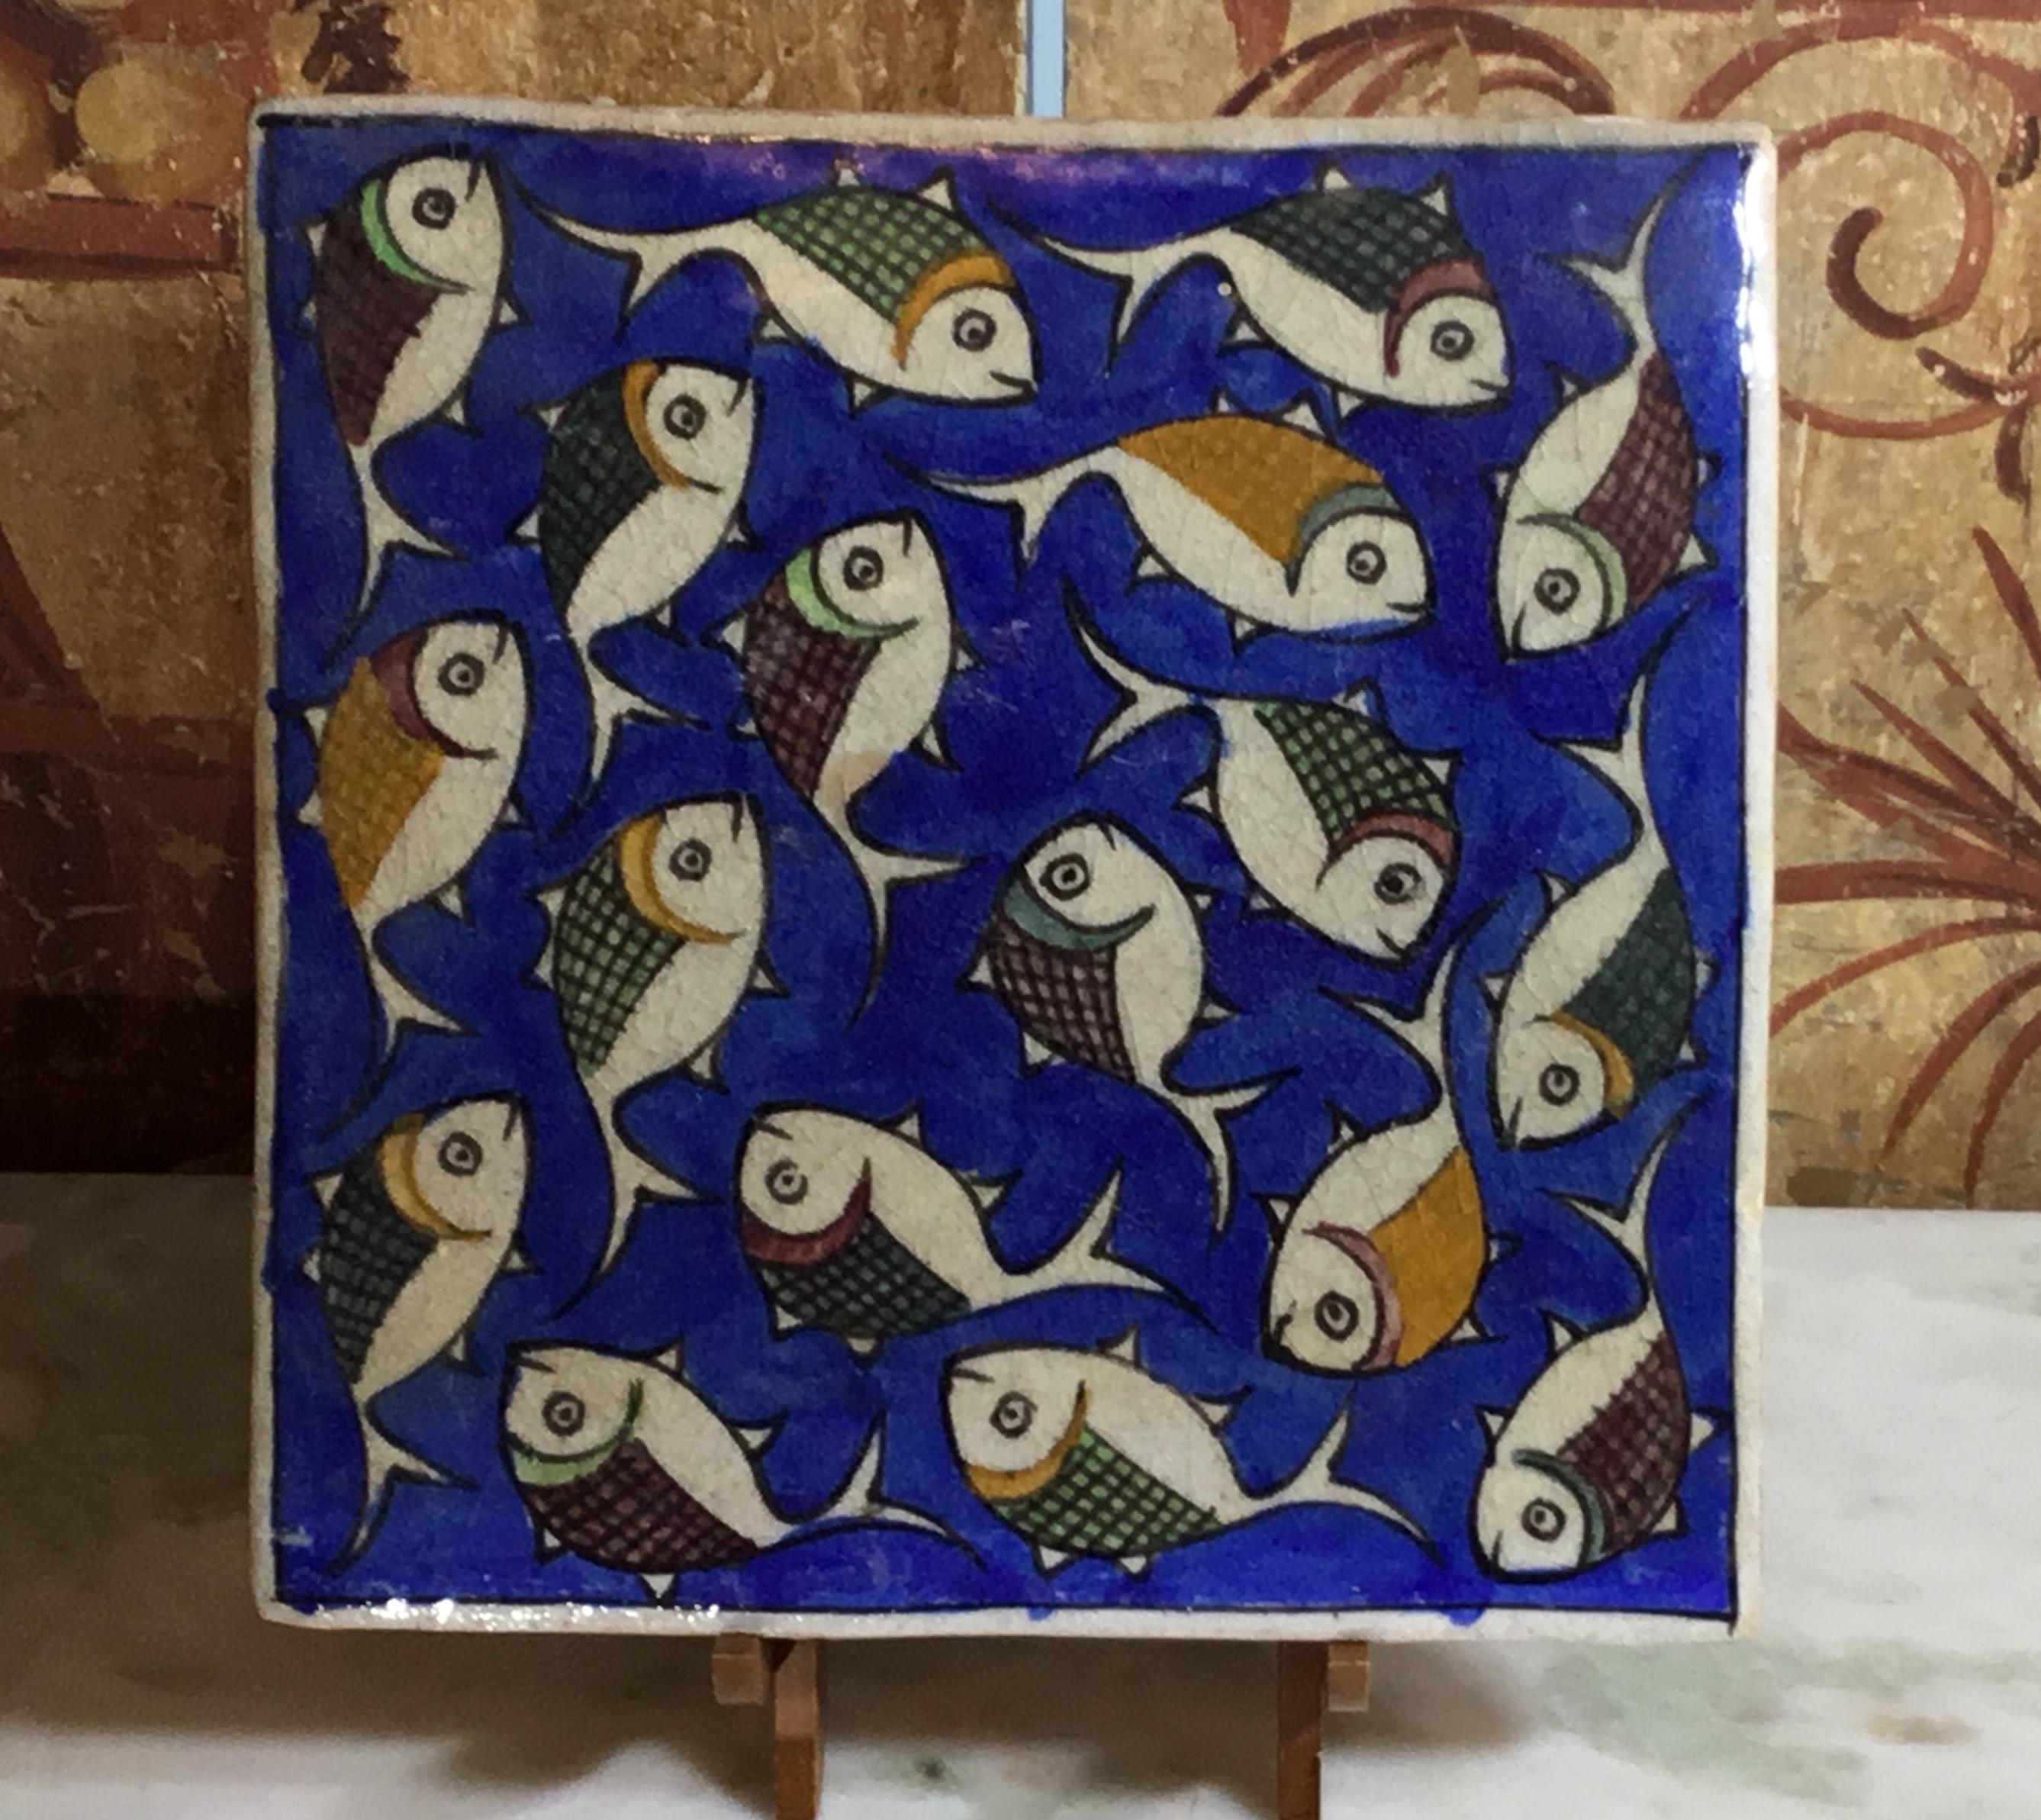 Beautiful Persian tile hand painted and glazed with exceptional wondering colorful school of fish on a blue color background. The tile can hang on the wall, or display on wood stand. Display piece included.